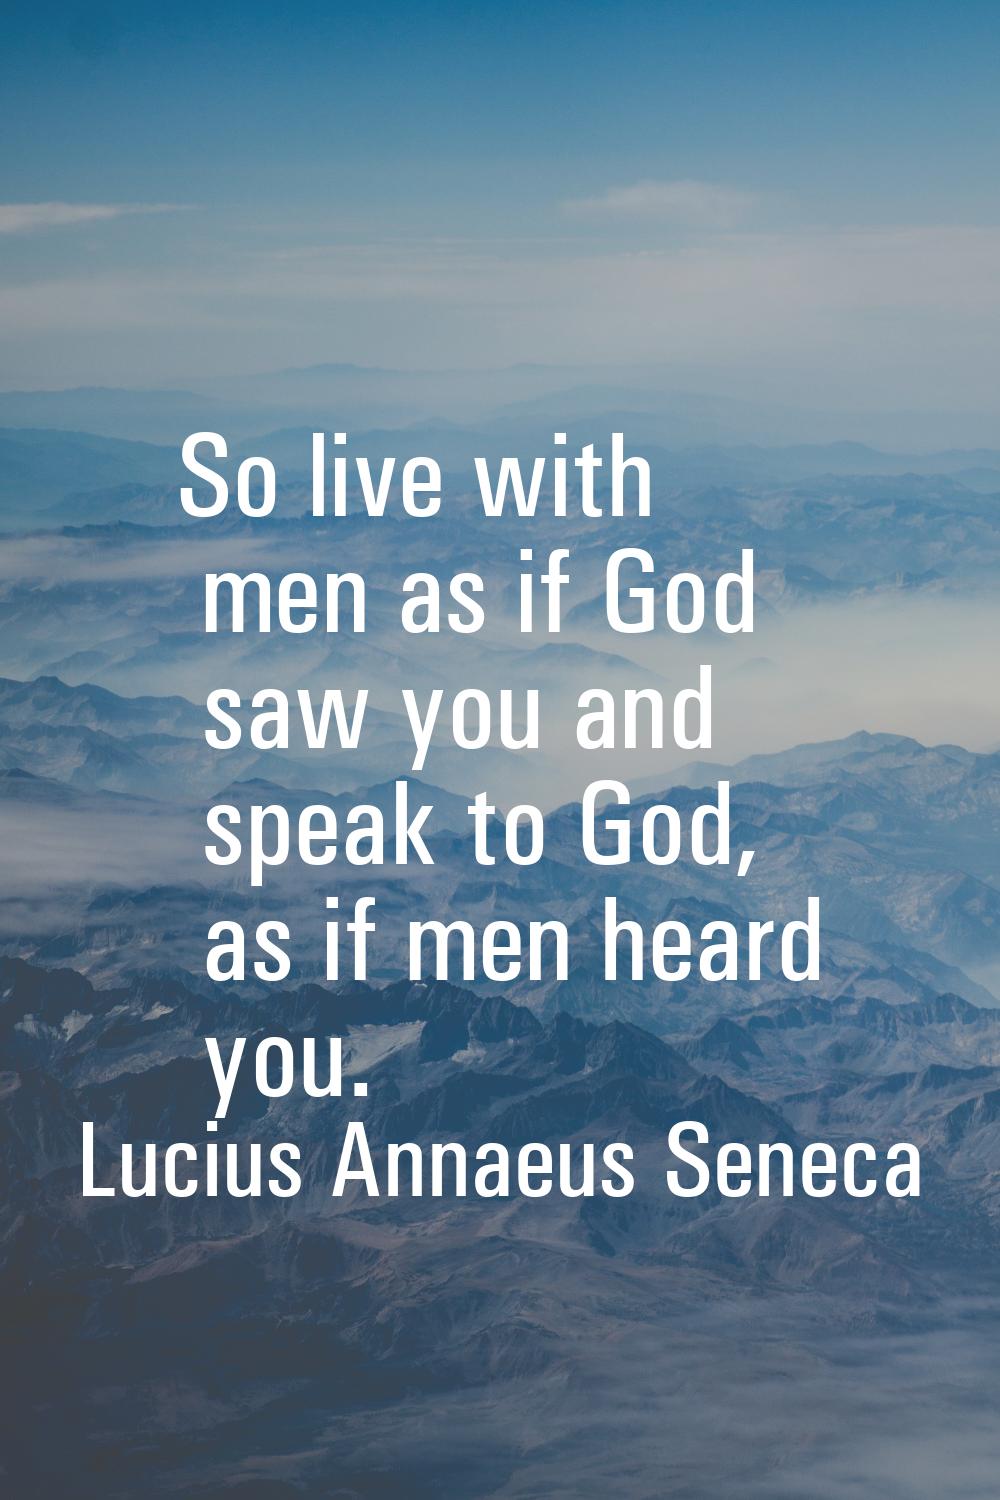 So live with men as if God saw you and speak to God, as if men heard you.